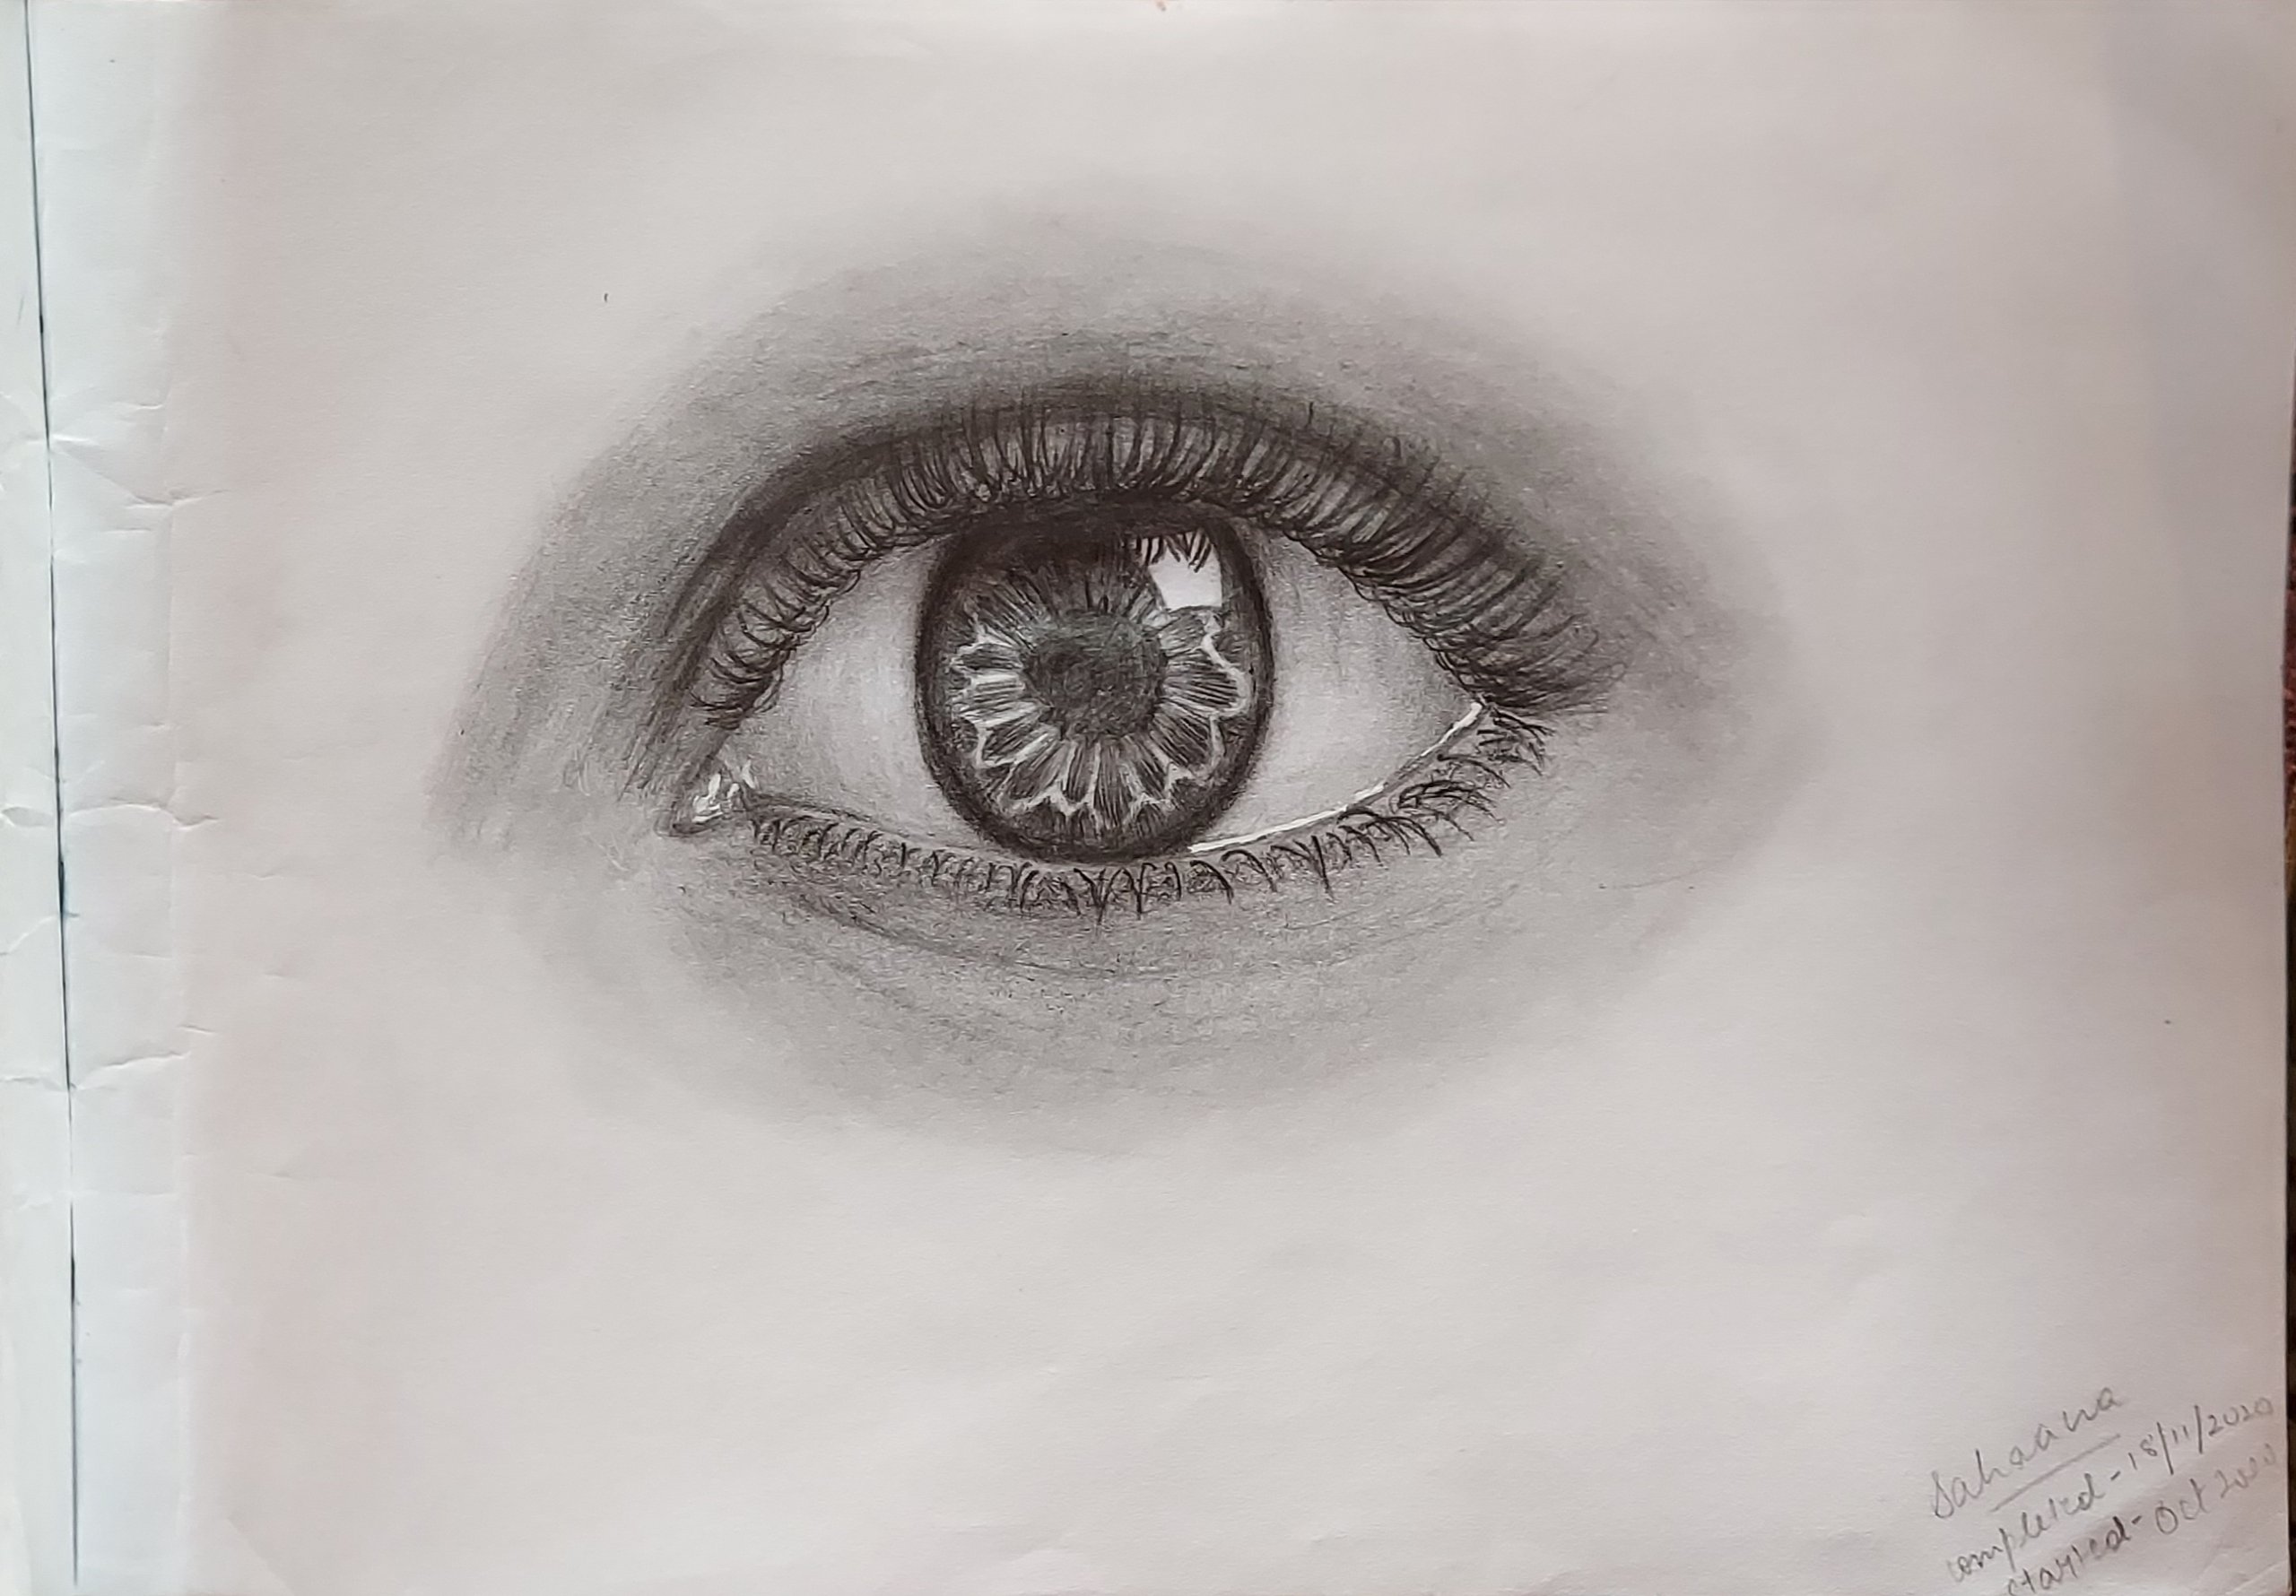 How to Draw Realistic Eyes with Step by Step Drawing Tutorial in Easy Steps   How to Draw Step by Step Drawing Tutorials